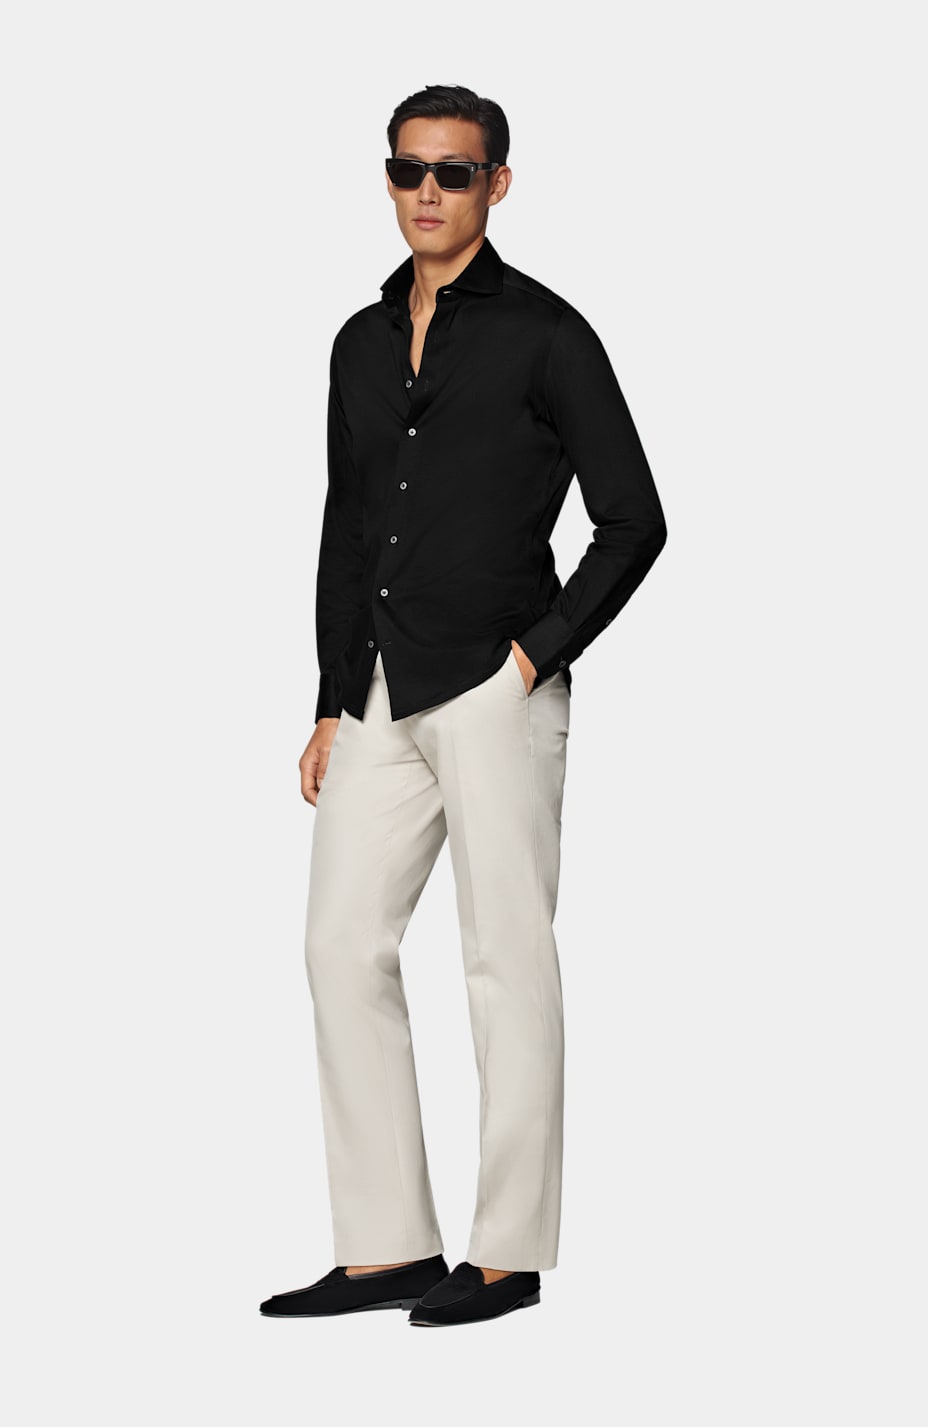 Indian Man At Black Shirt And Beige Pants Posed At Field. Stock Photo,  Picture and Royalty Free Image. Image 131317034.